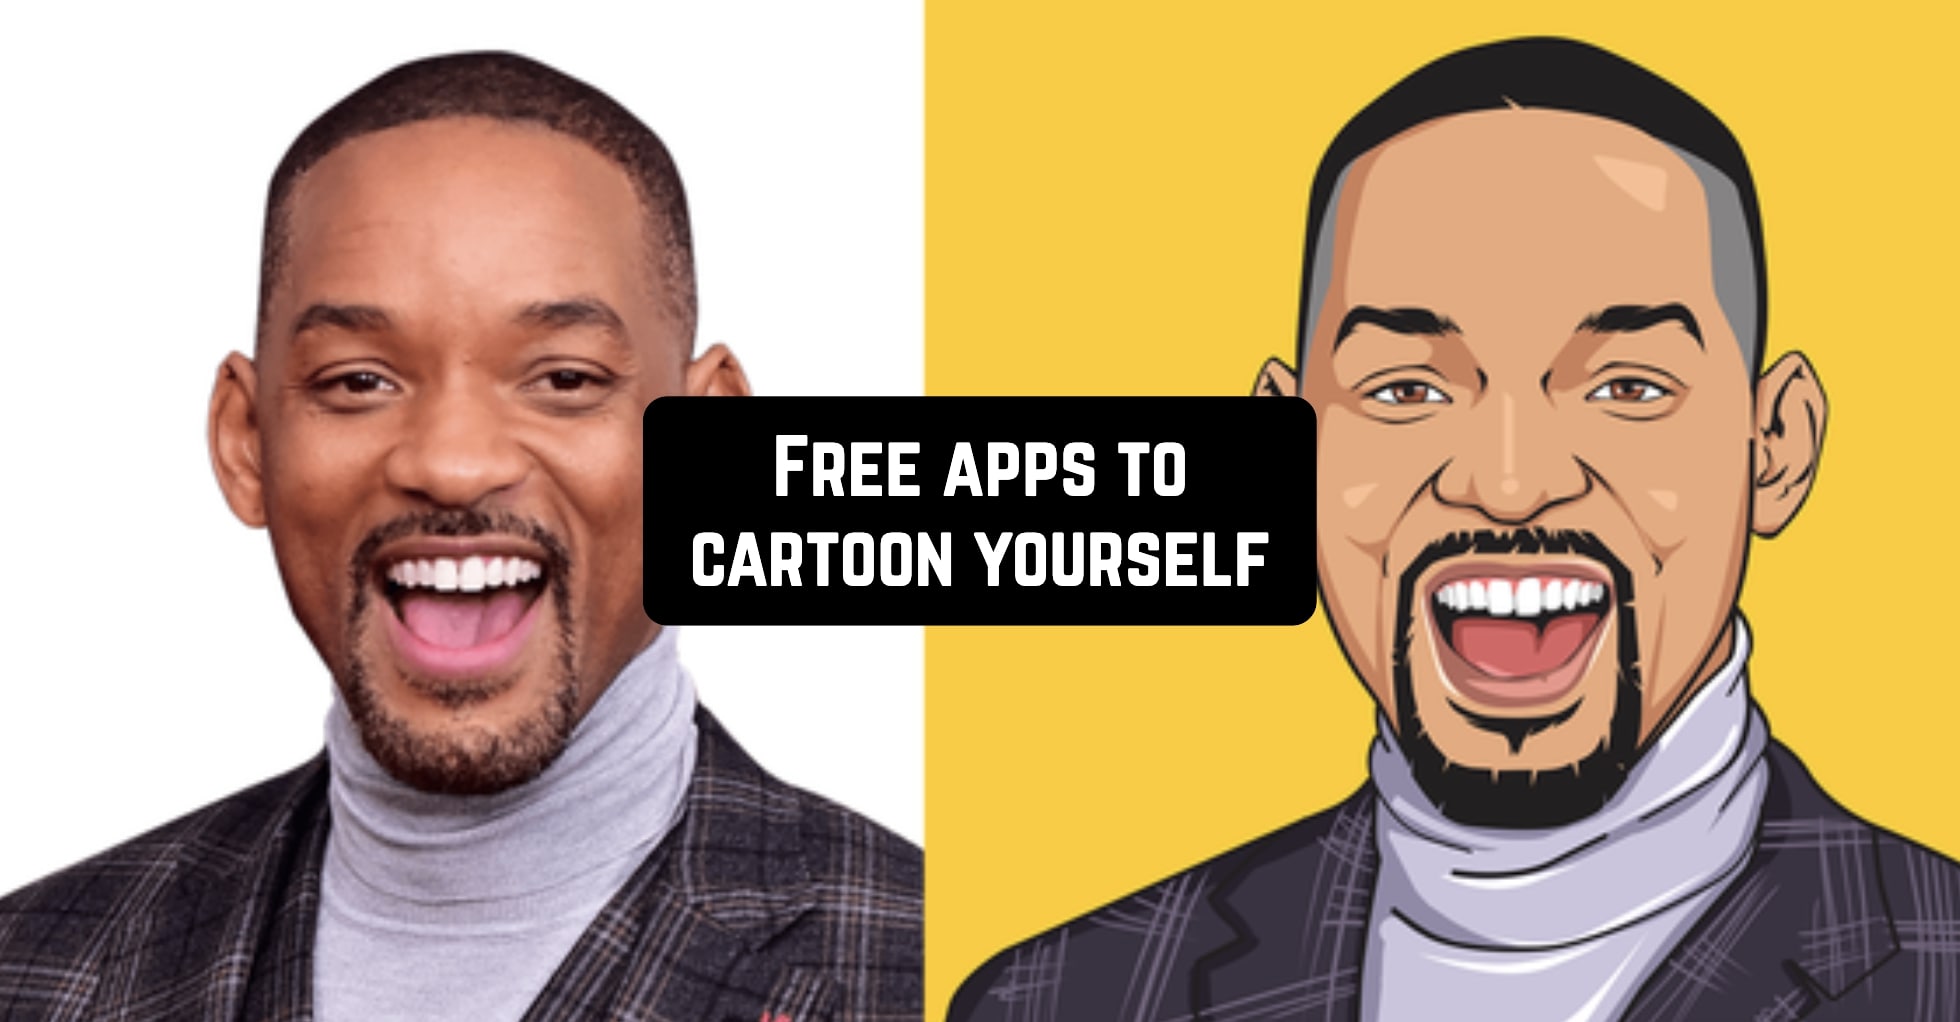 11 Free apps to cartoon yourself on Android & iOS - App pearl - Best mobile  apps for Android & iOS devices